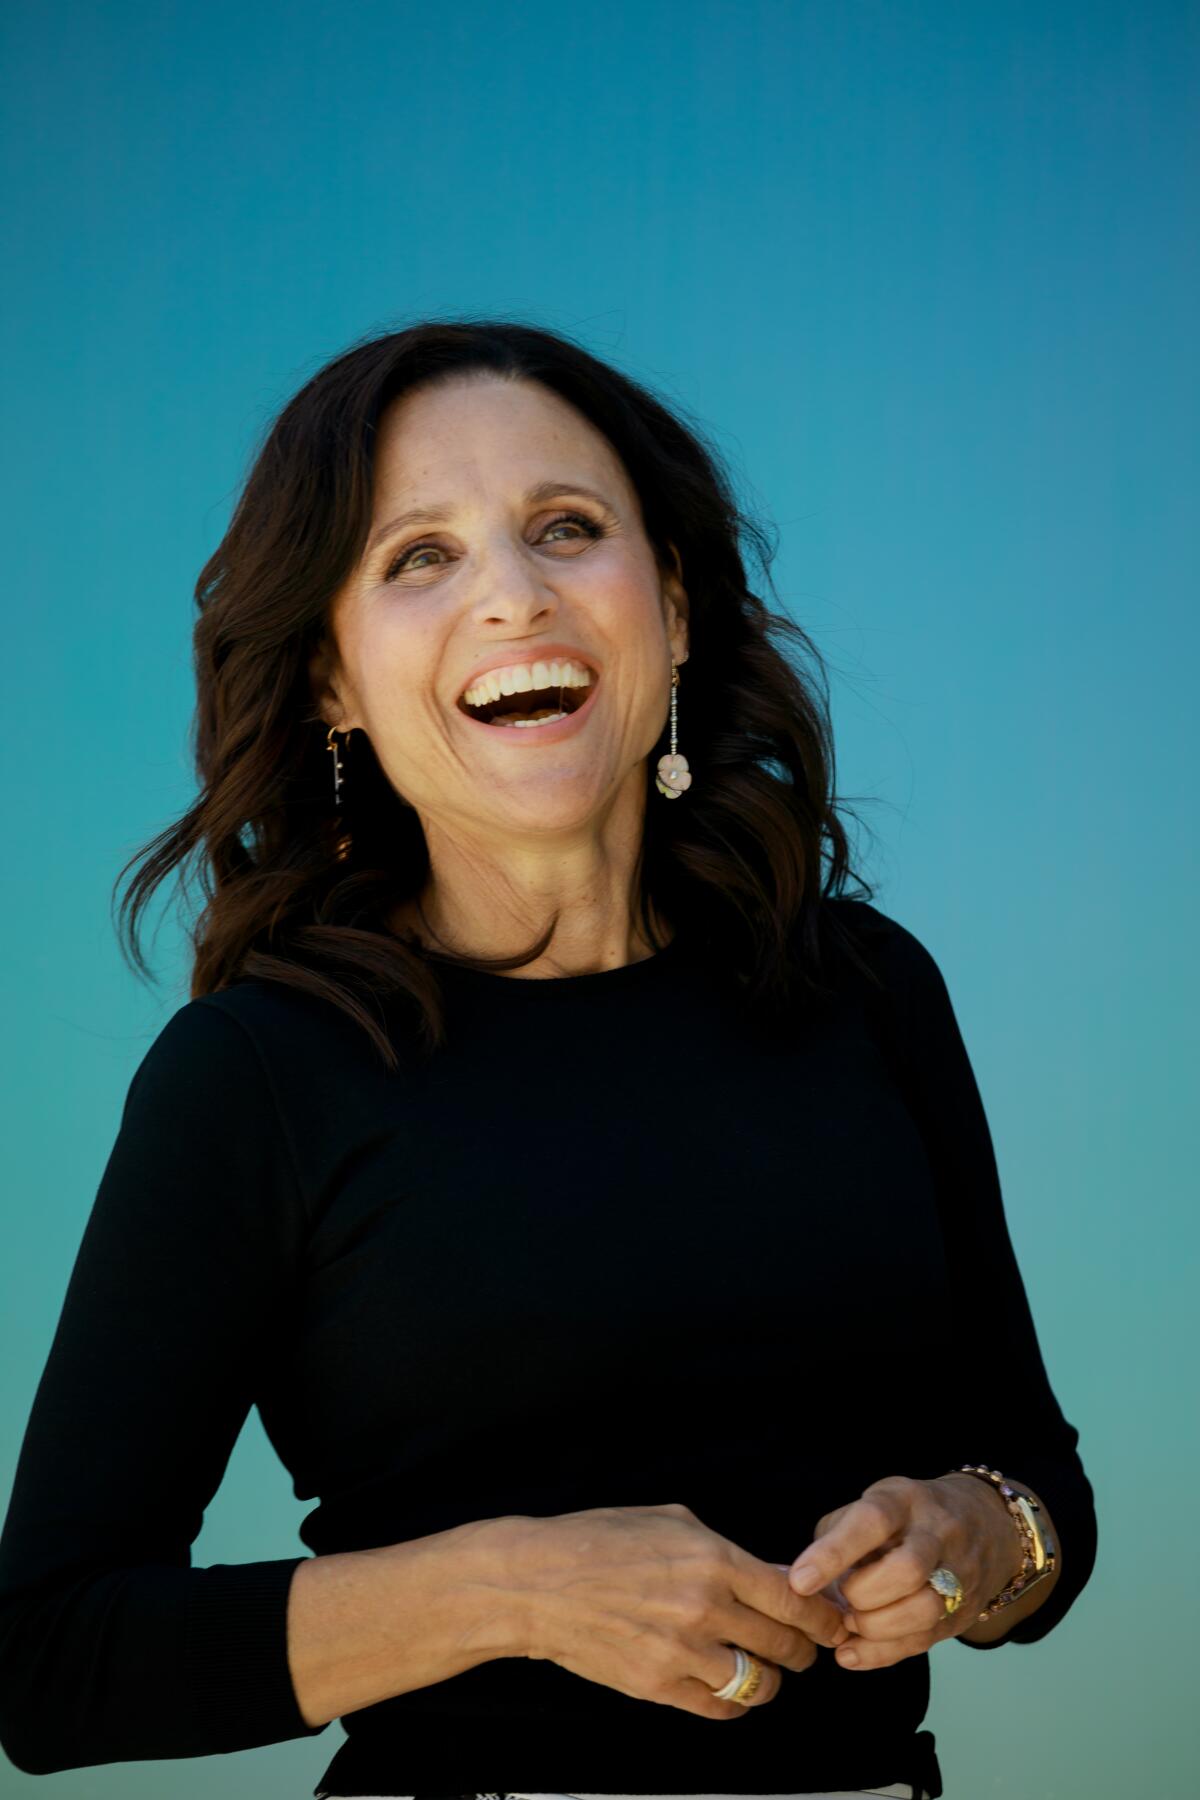 Julia Louis-Dreyfus laughs as she poses for a photo